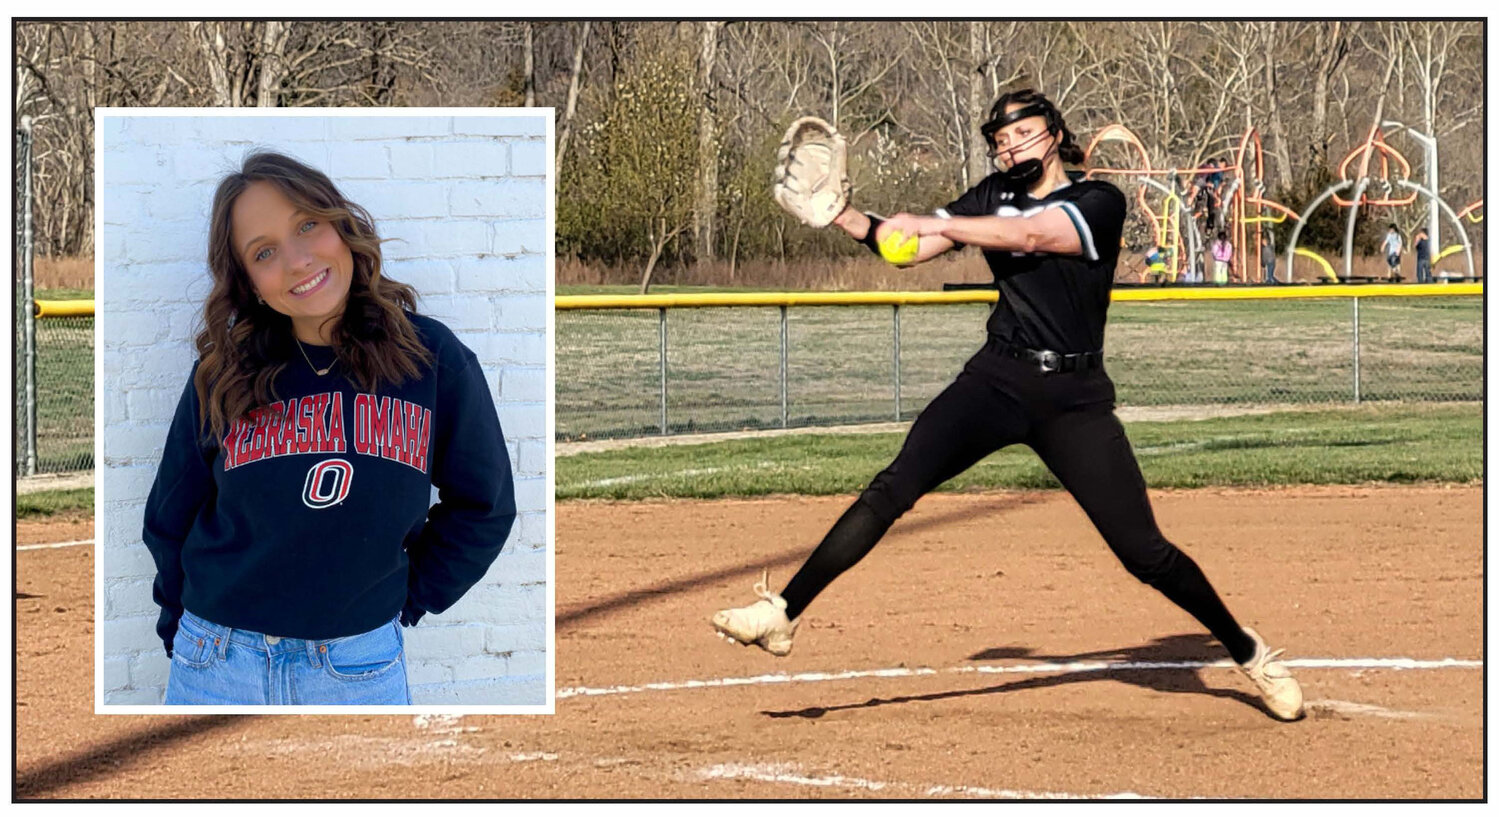 TAKING HER TALENTS NORTH, Warsaw's Brylee Brewster has verbally committed to attend the University of Nebraska-Omaha where she will continue her education and pursue her softball dreams. Brewster is a junior at WHS.